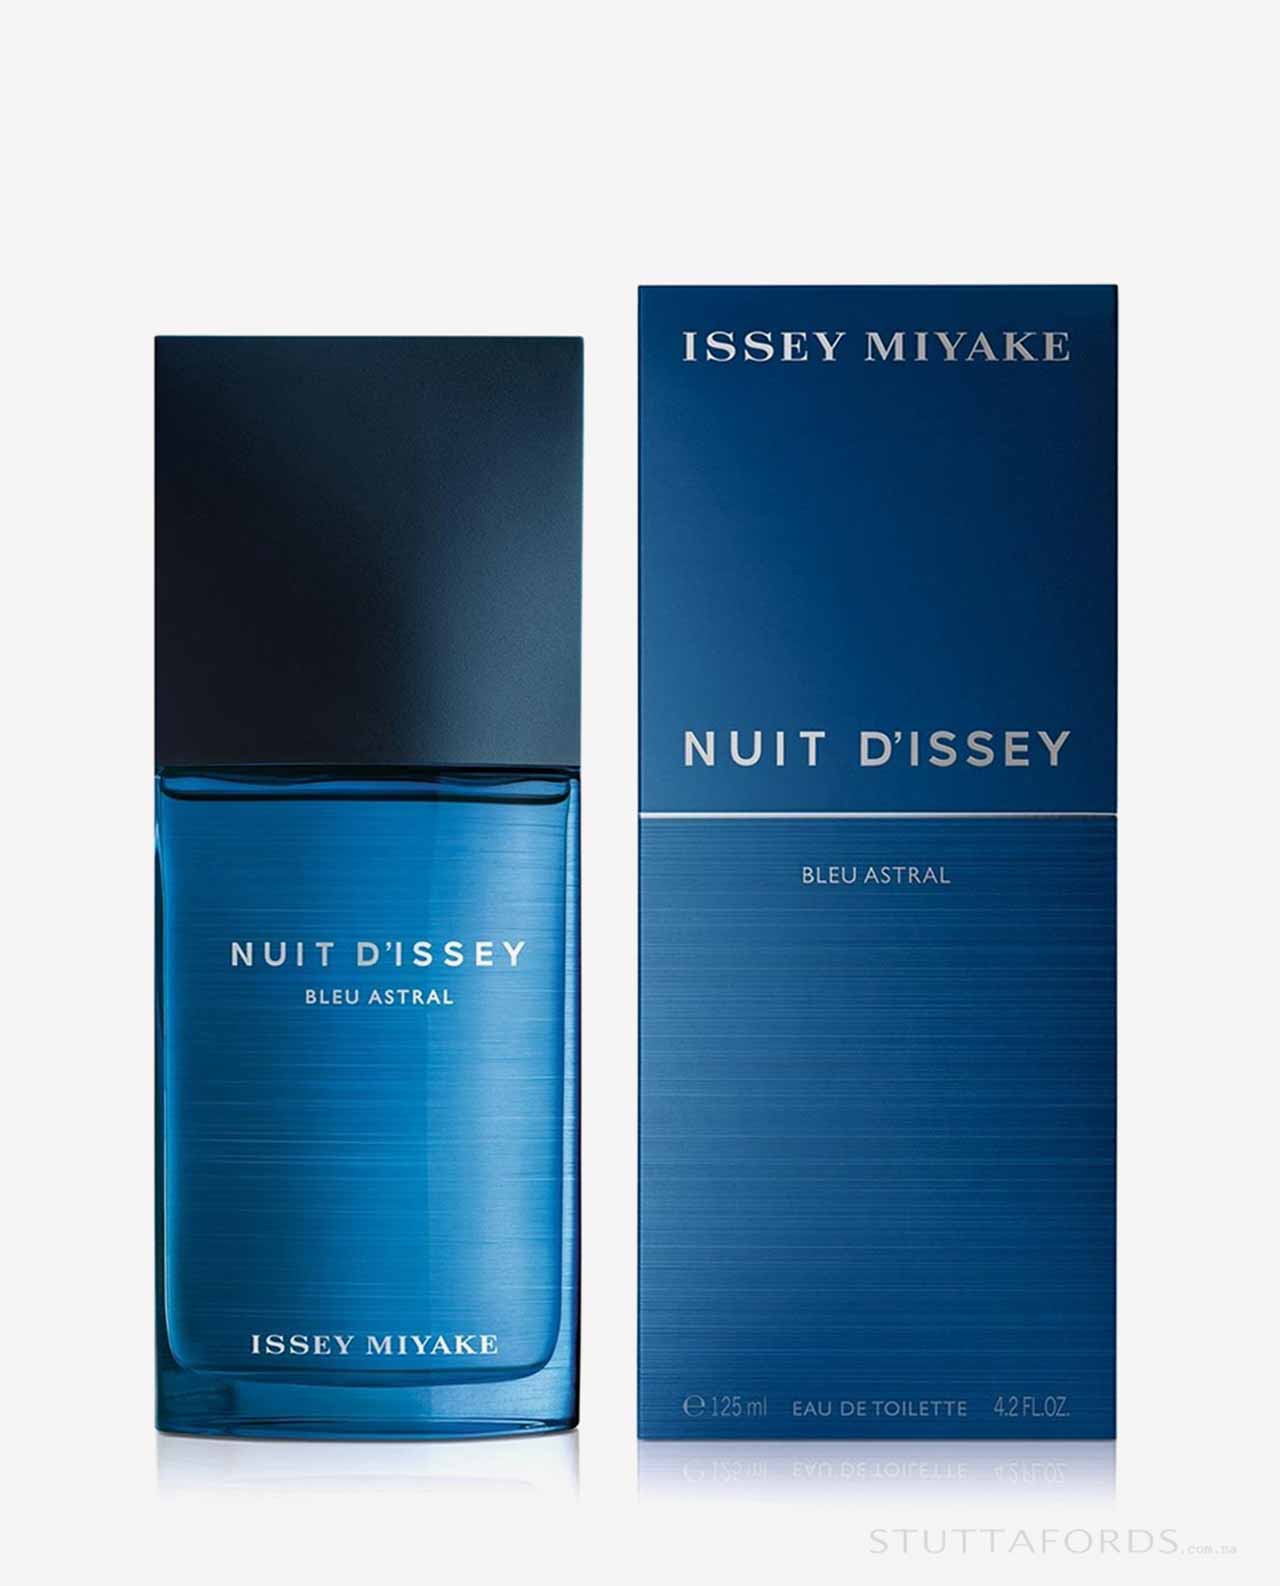 ISSY MIYAKE – NUIT D’ISSEY BLEU ASTRAL EDT 125mL